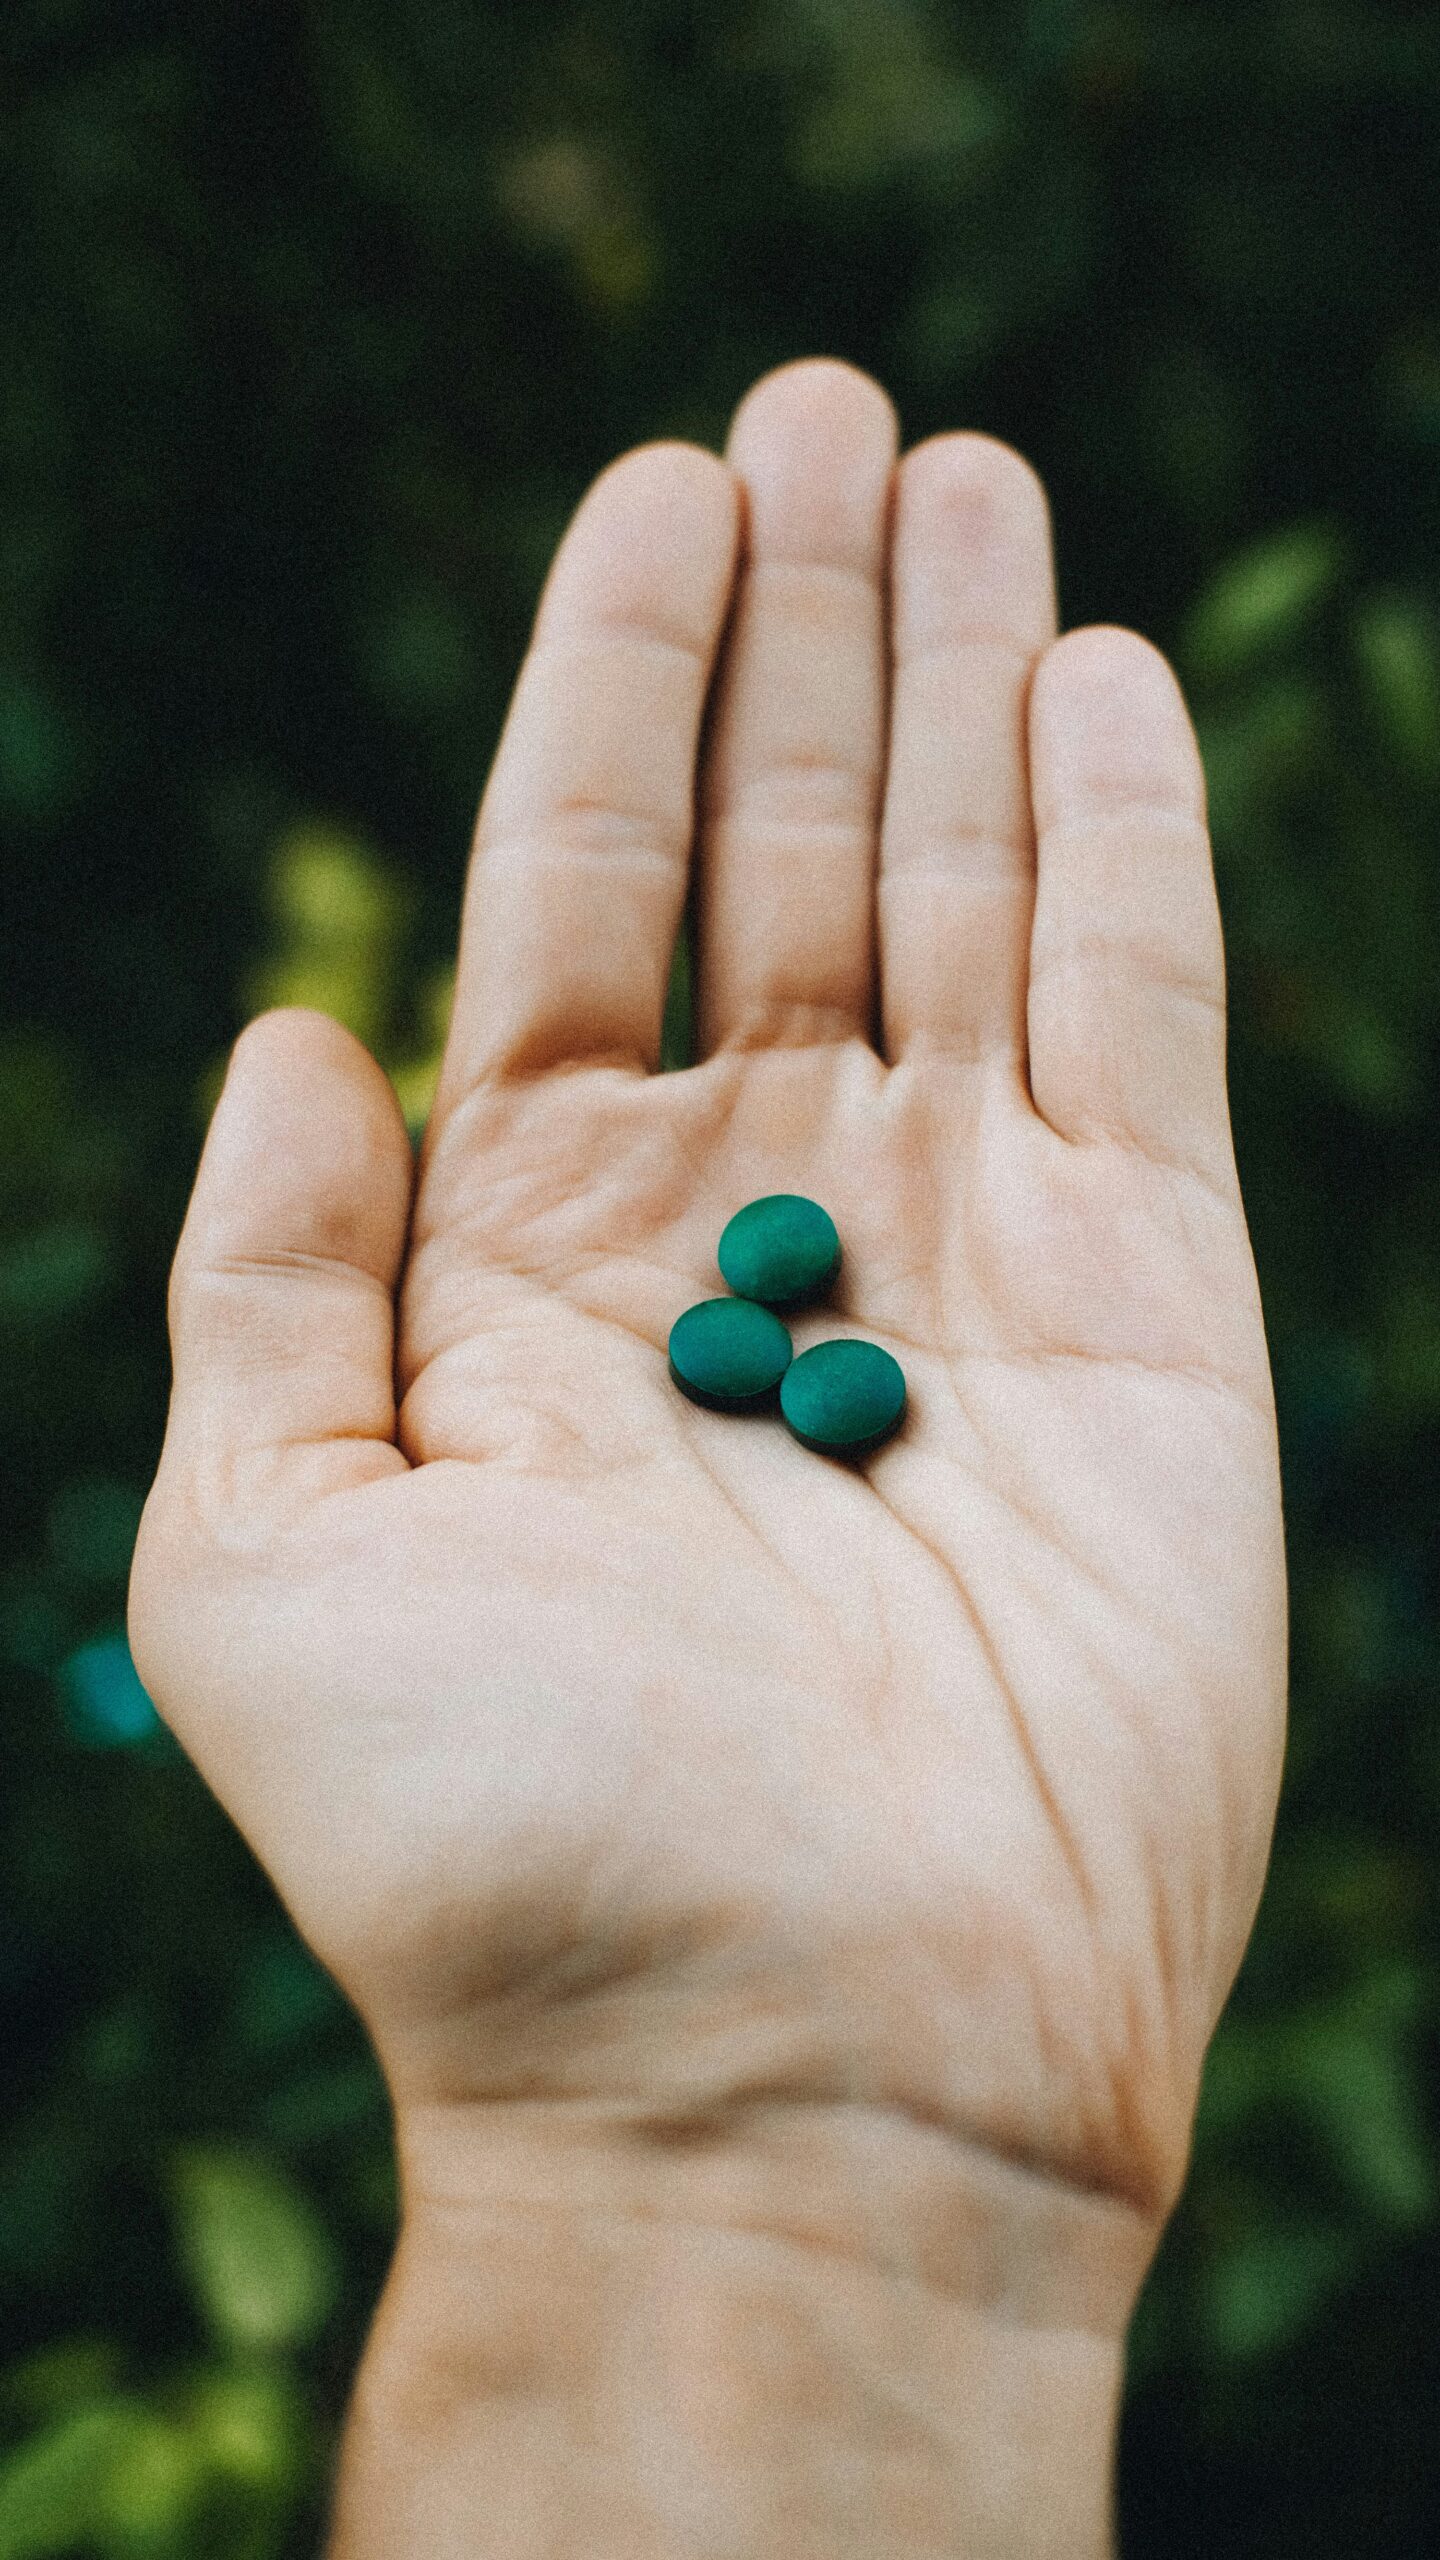 Two green pills in a person's hand.